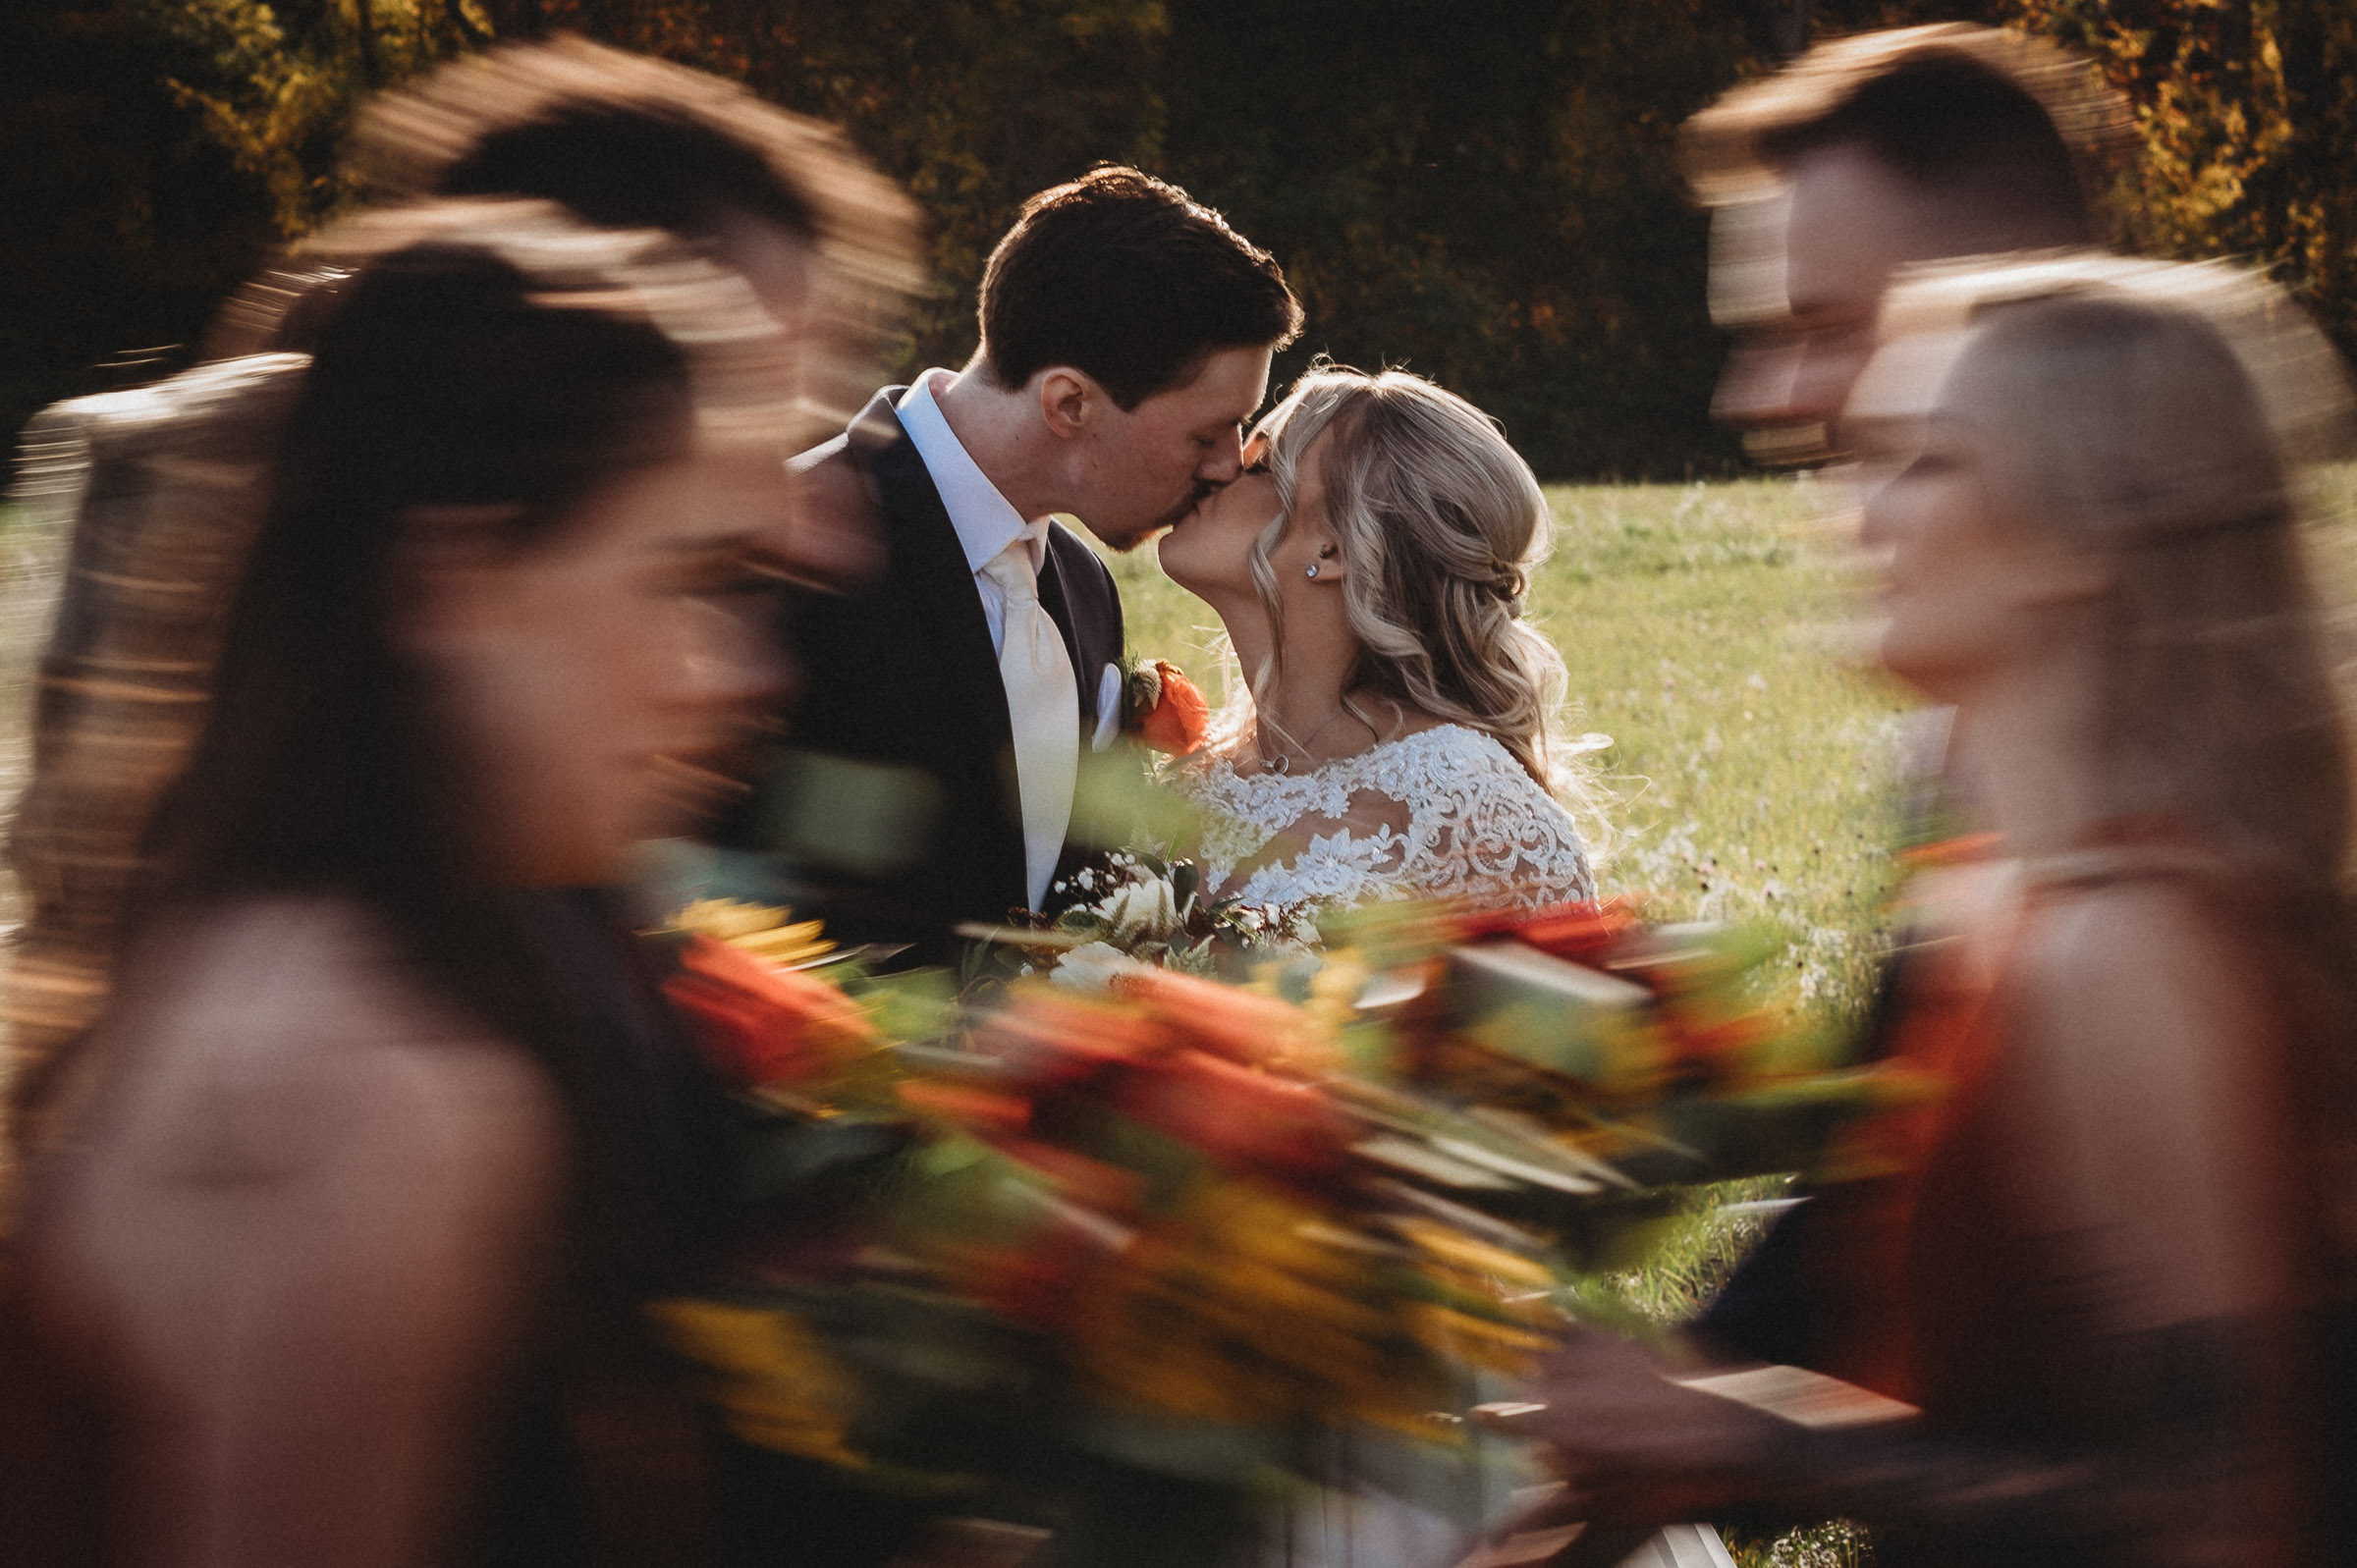 A Connecticut bride and groom kiss as their wedding party, carrying orange bouquets, walks past quickly.